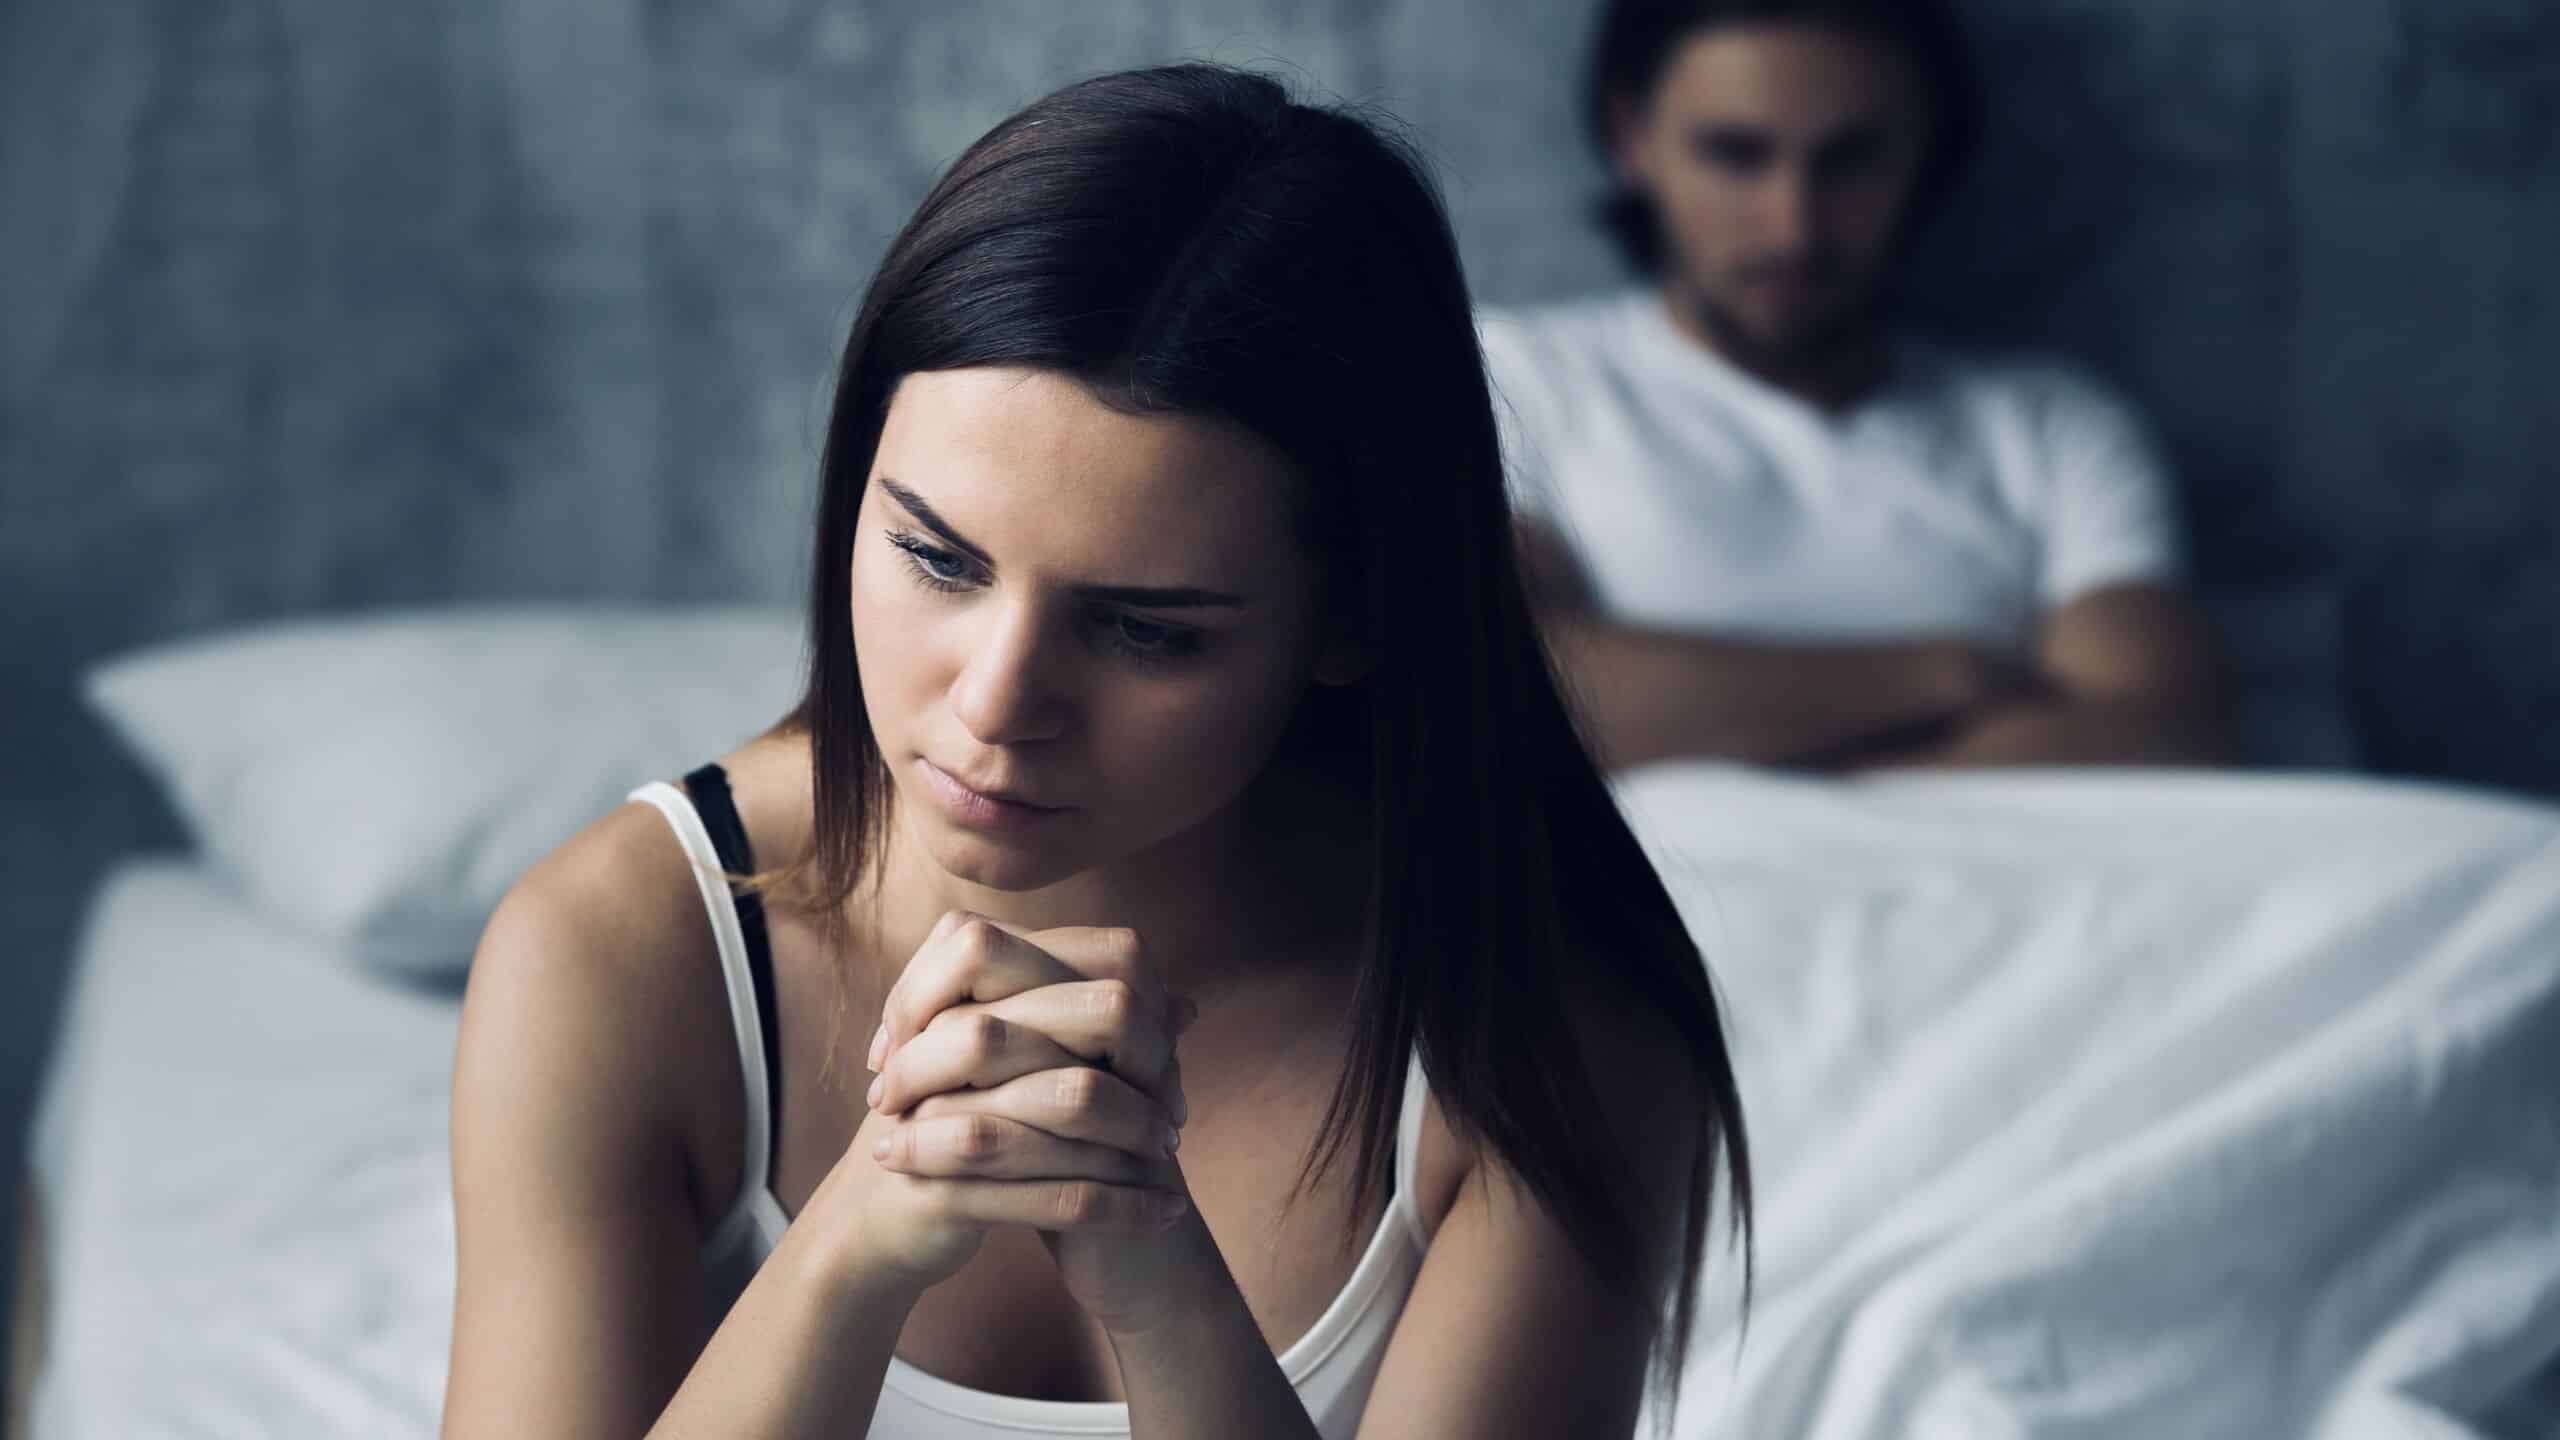 10 Things to Say to Your Partner When You Feel Unappreciated